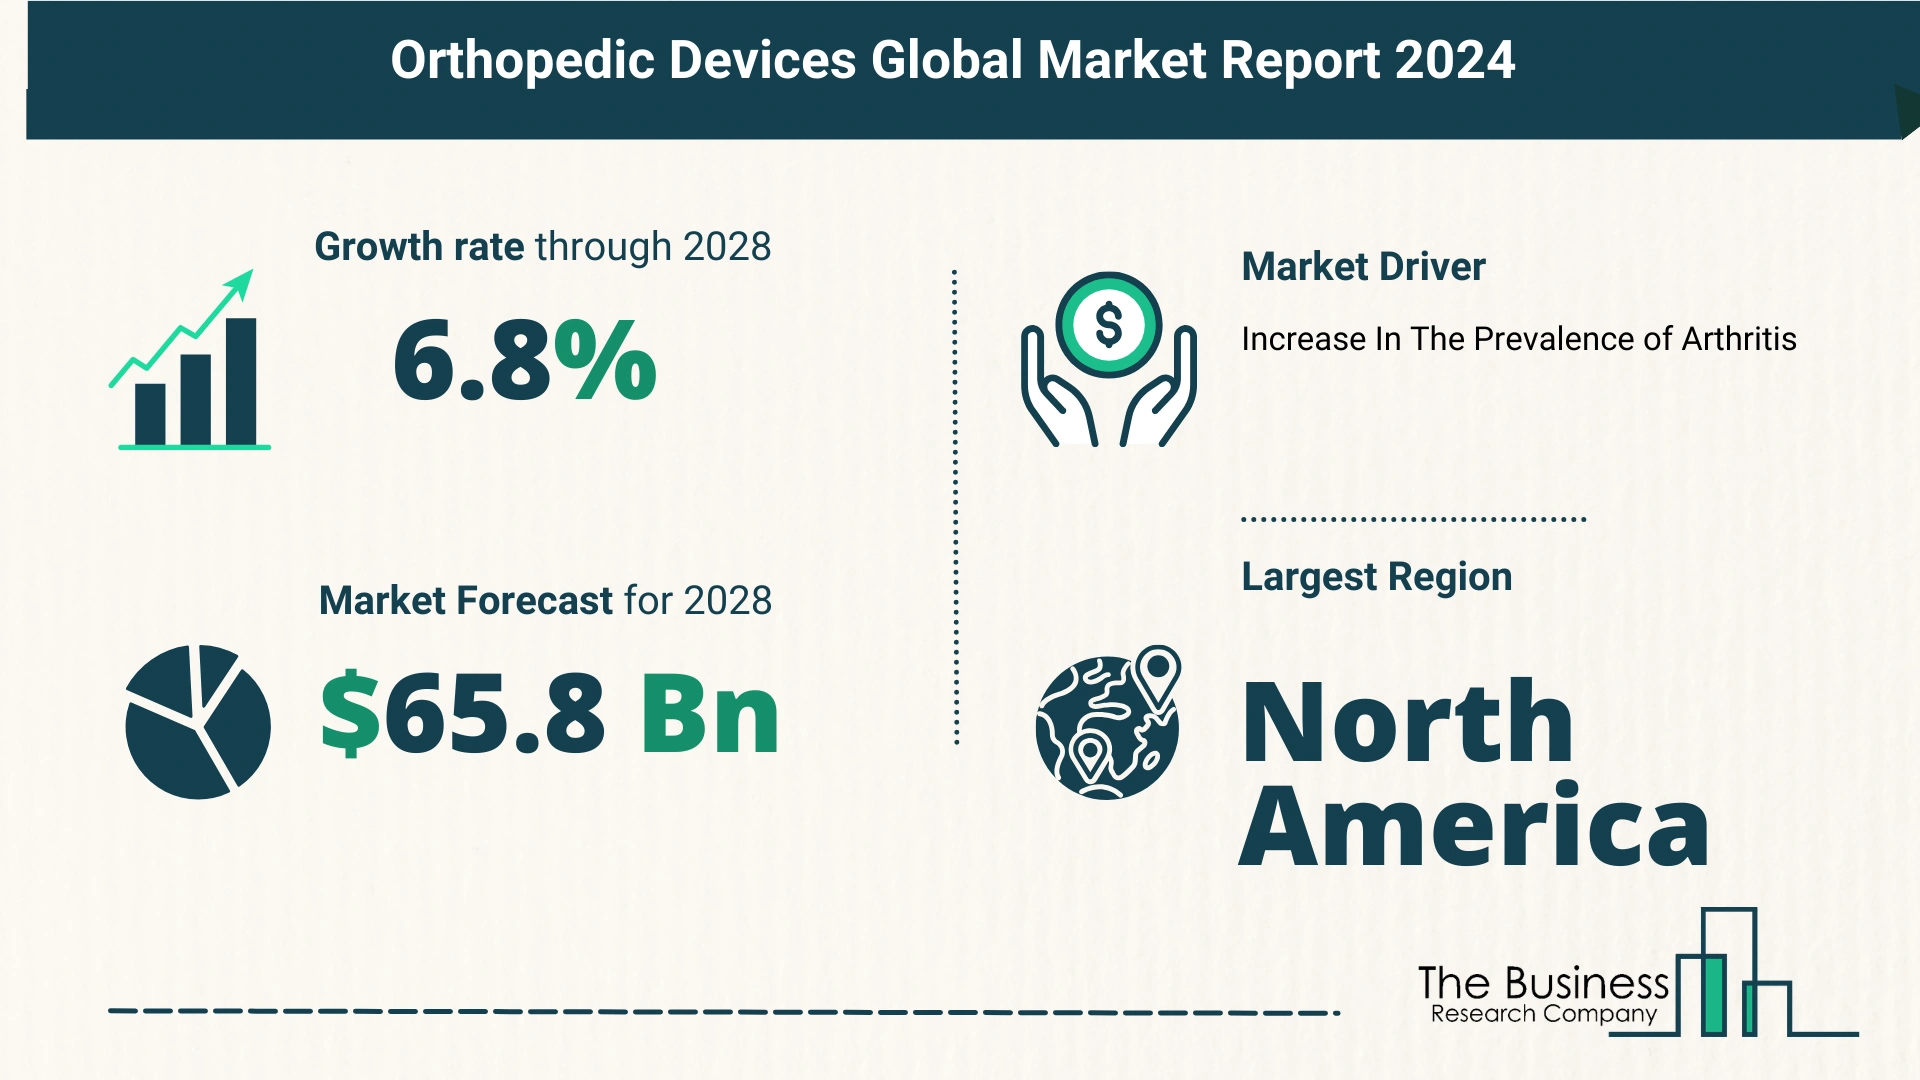 Top 5 Insights From The Orthopedic Devices Market Report 2024